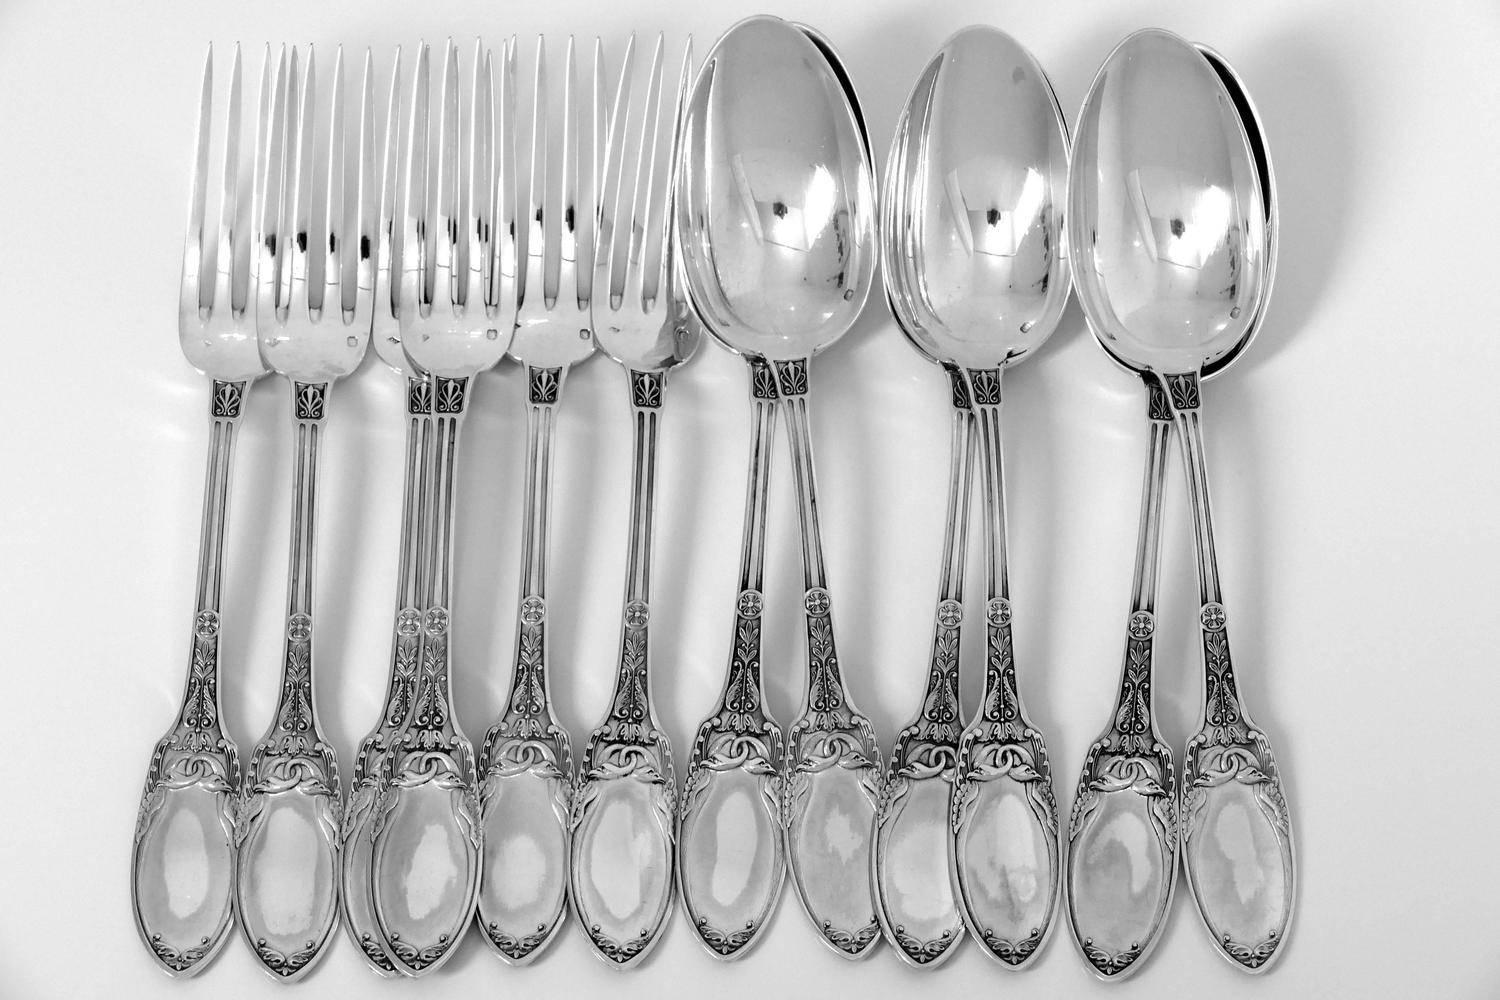 Combeau rare French sterling silver dinner flatware set 12 pc swans.

Exceptional French sterling silver dinner flatware 12 pieces Empire style, the spatulas are carved on both sides of interlaced swans. Beautiful palmette and laurel